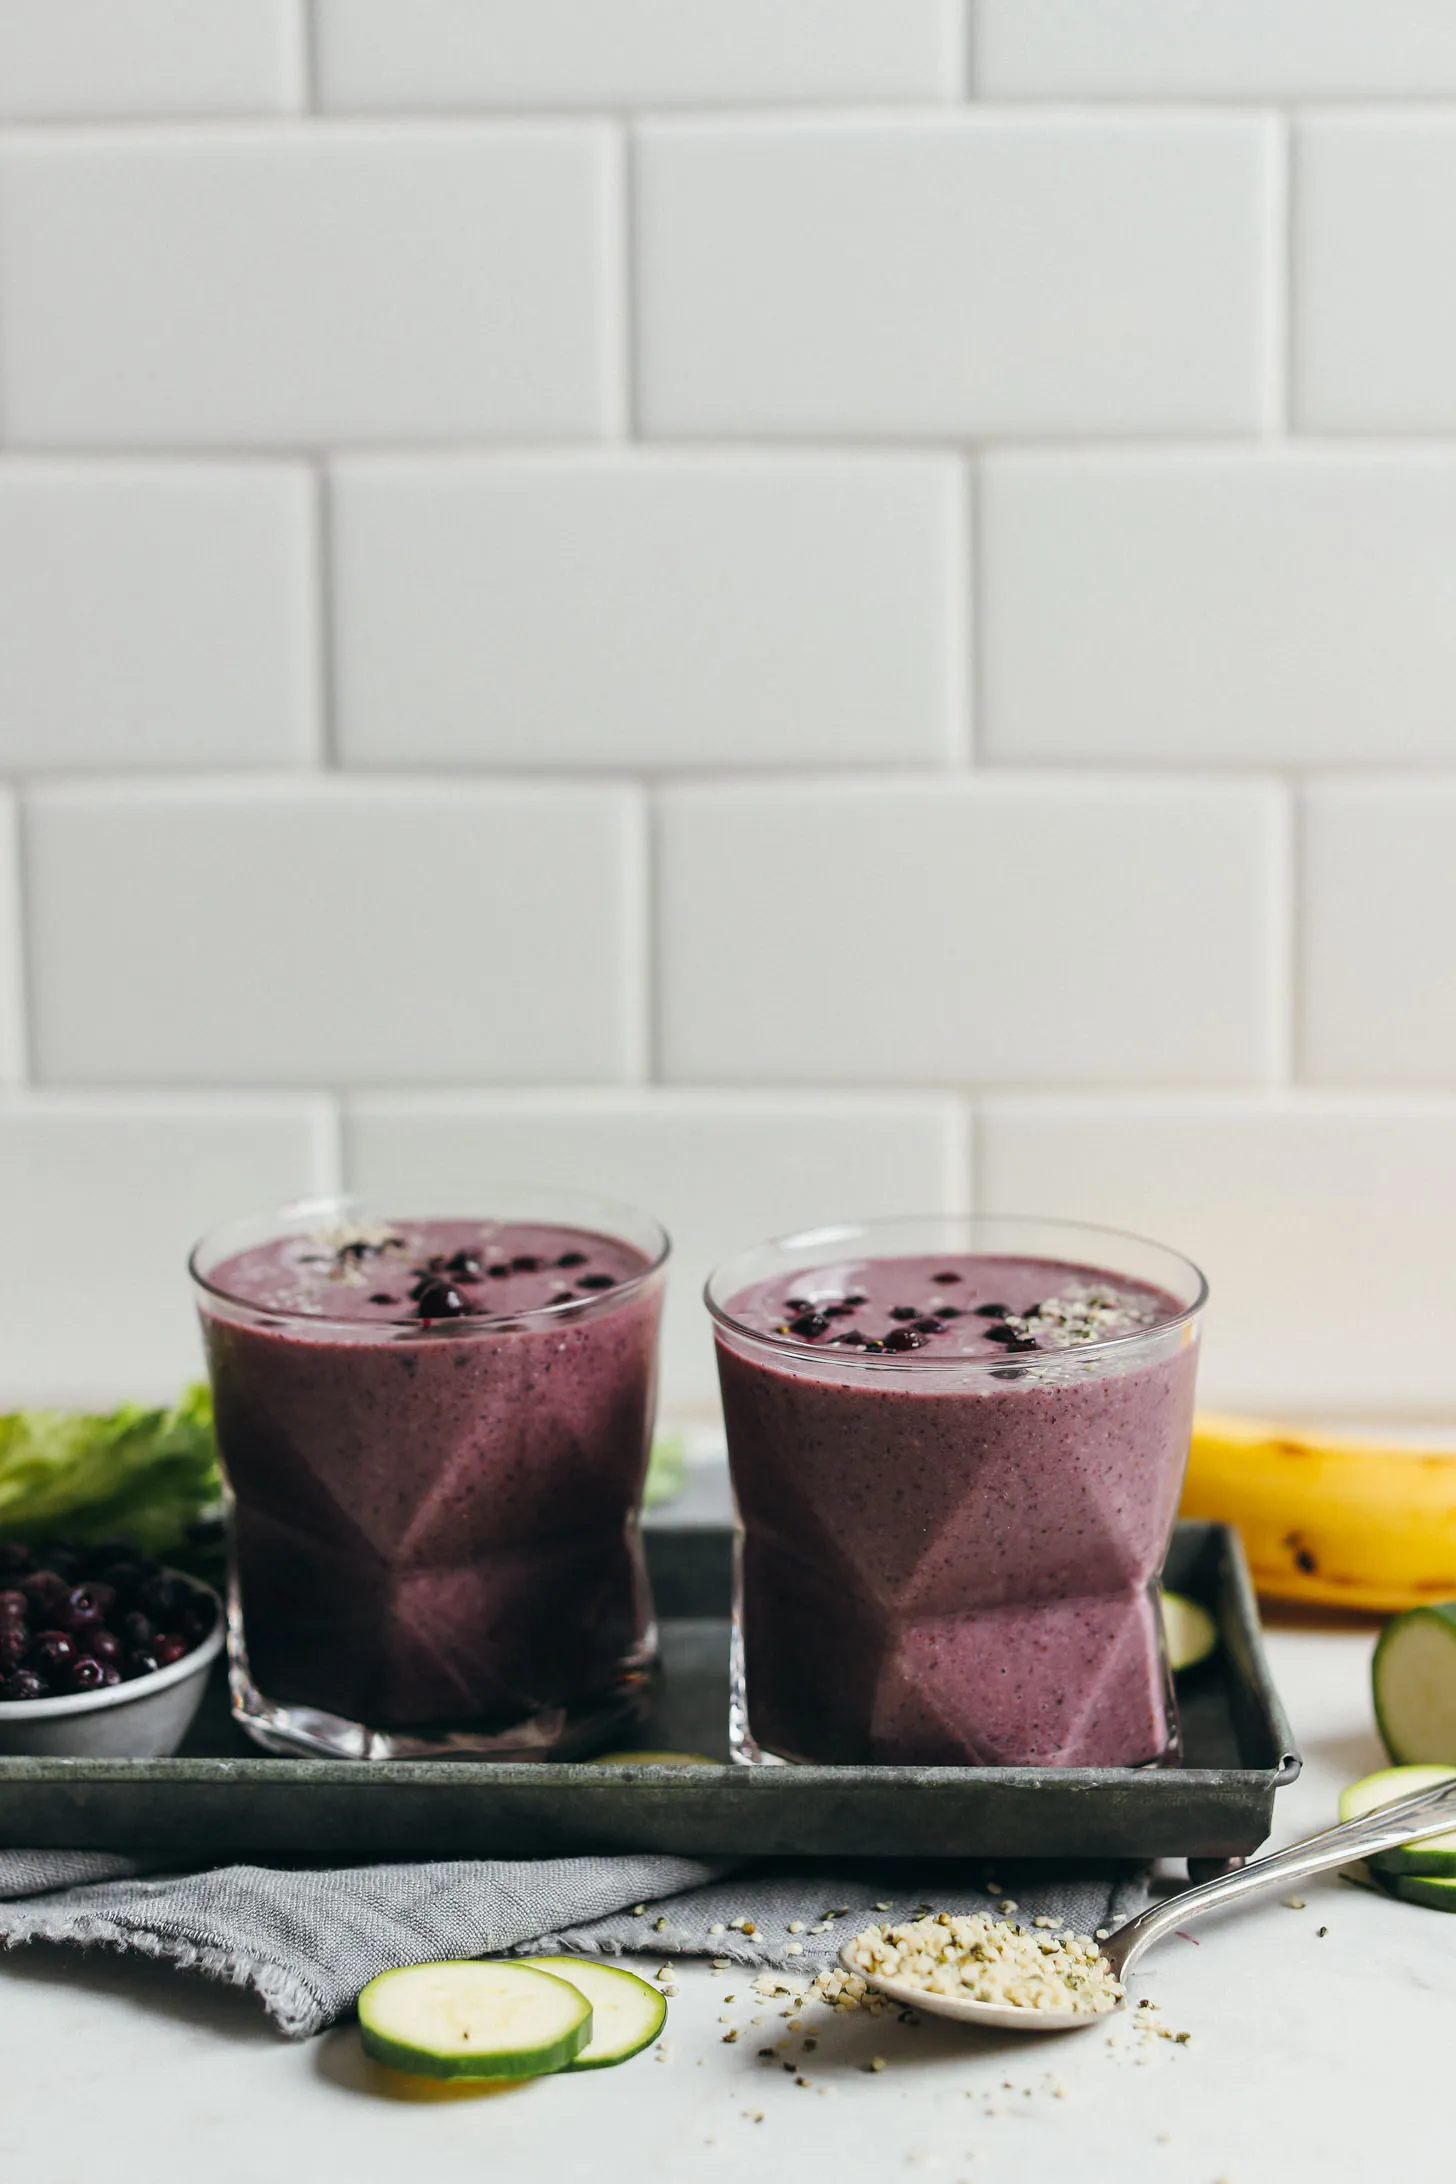 Two glasses filled with our Creamy Zucchini Blueberry recipe and topped with extra blueberries and hemp seeds